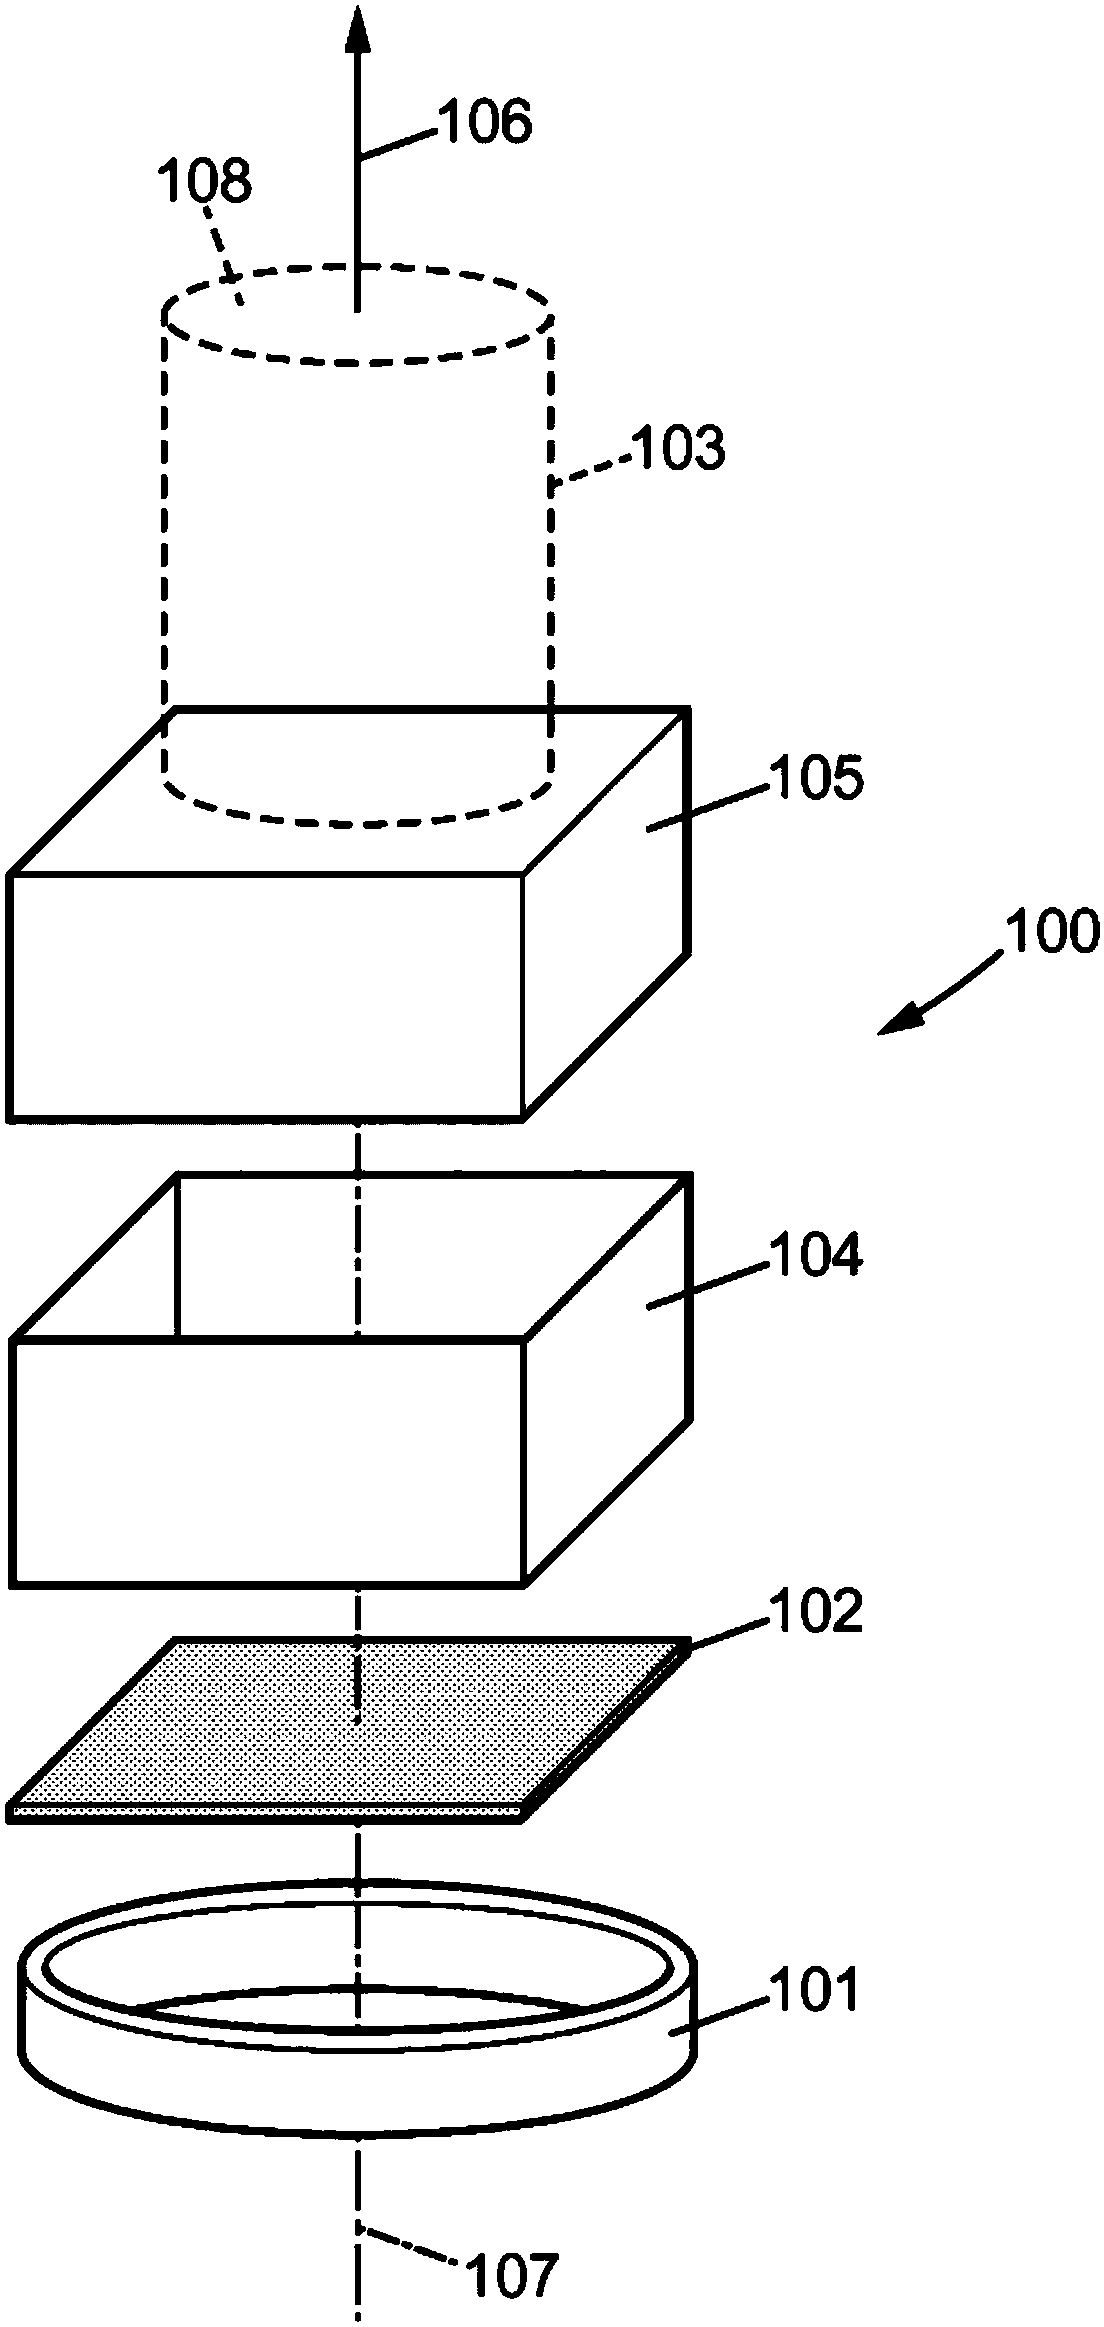 Satellite comprising optical photography instrument